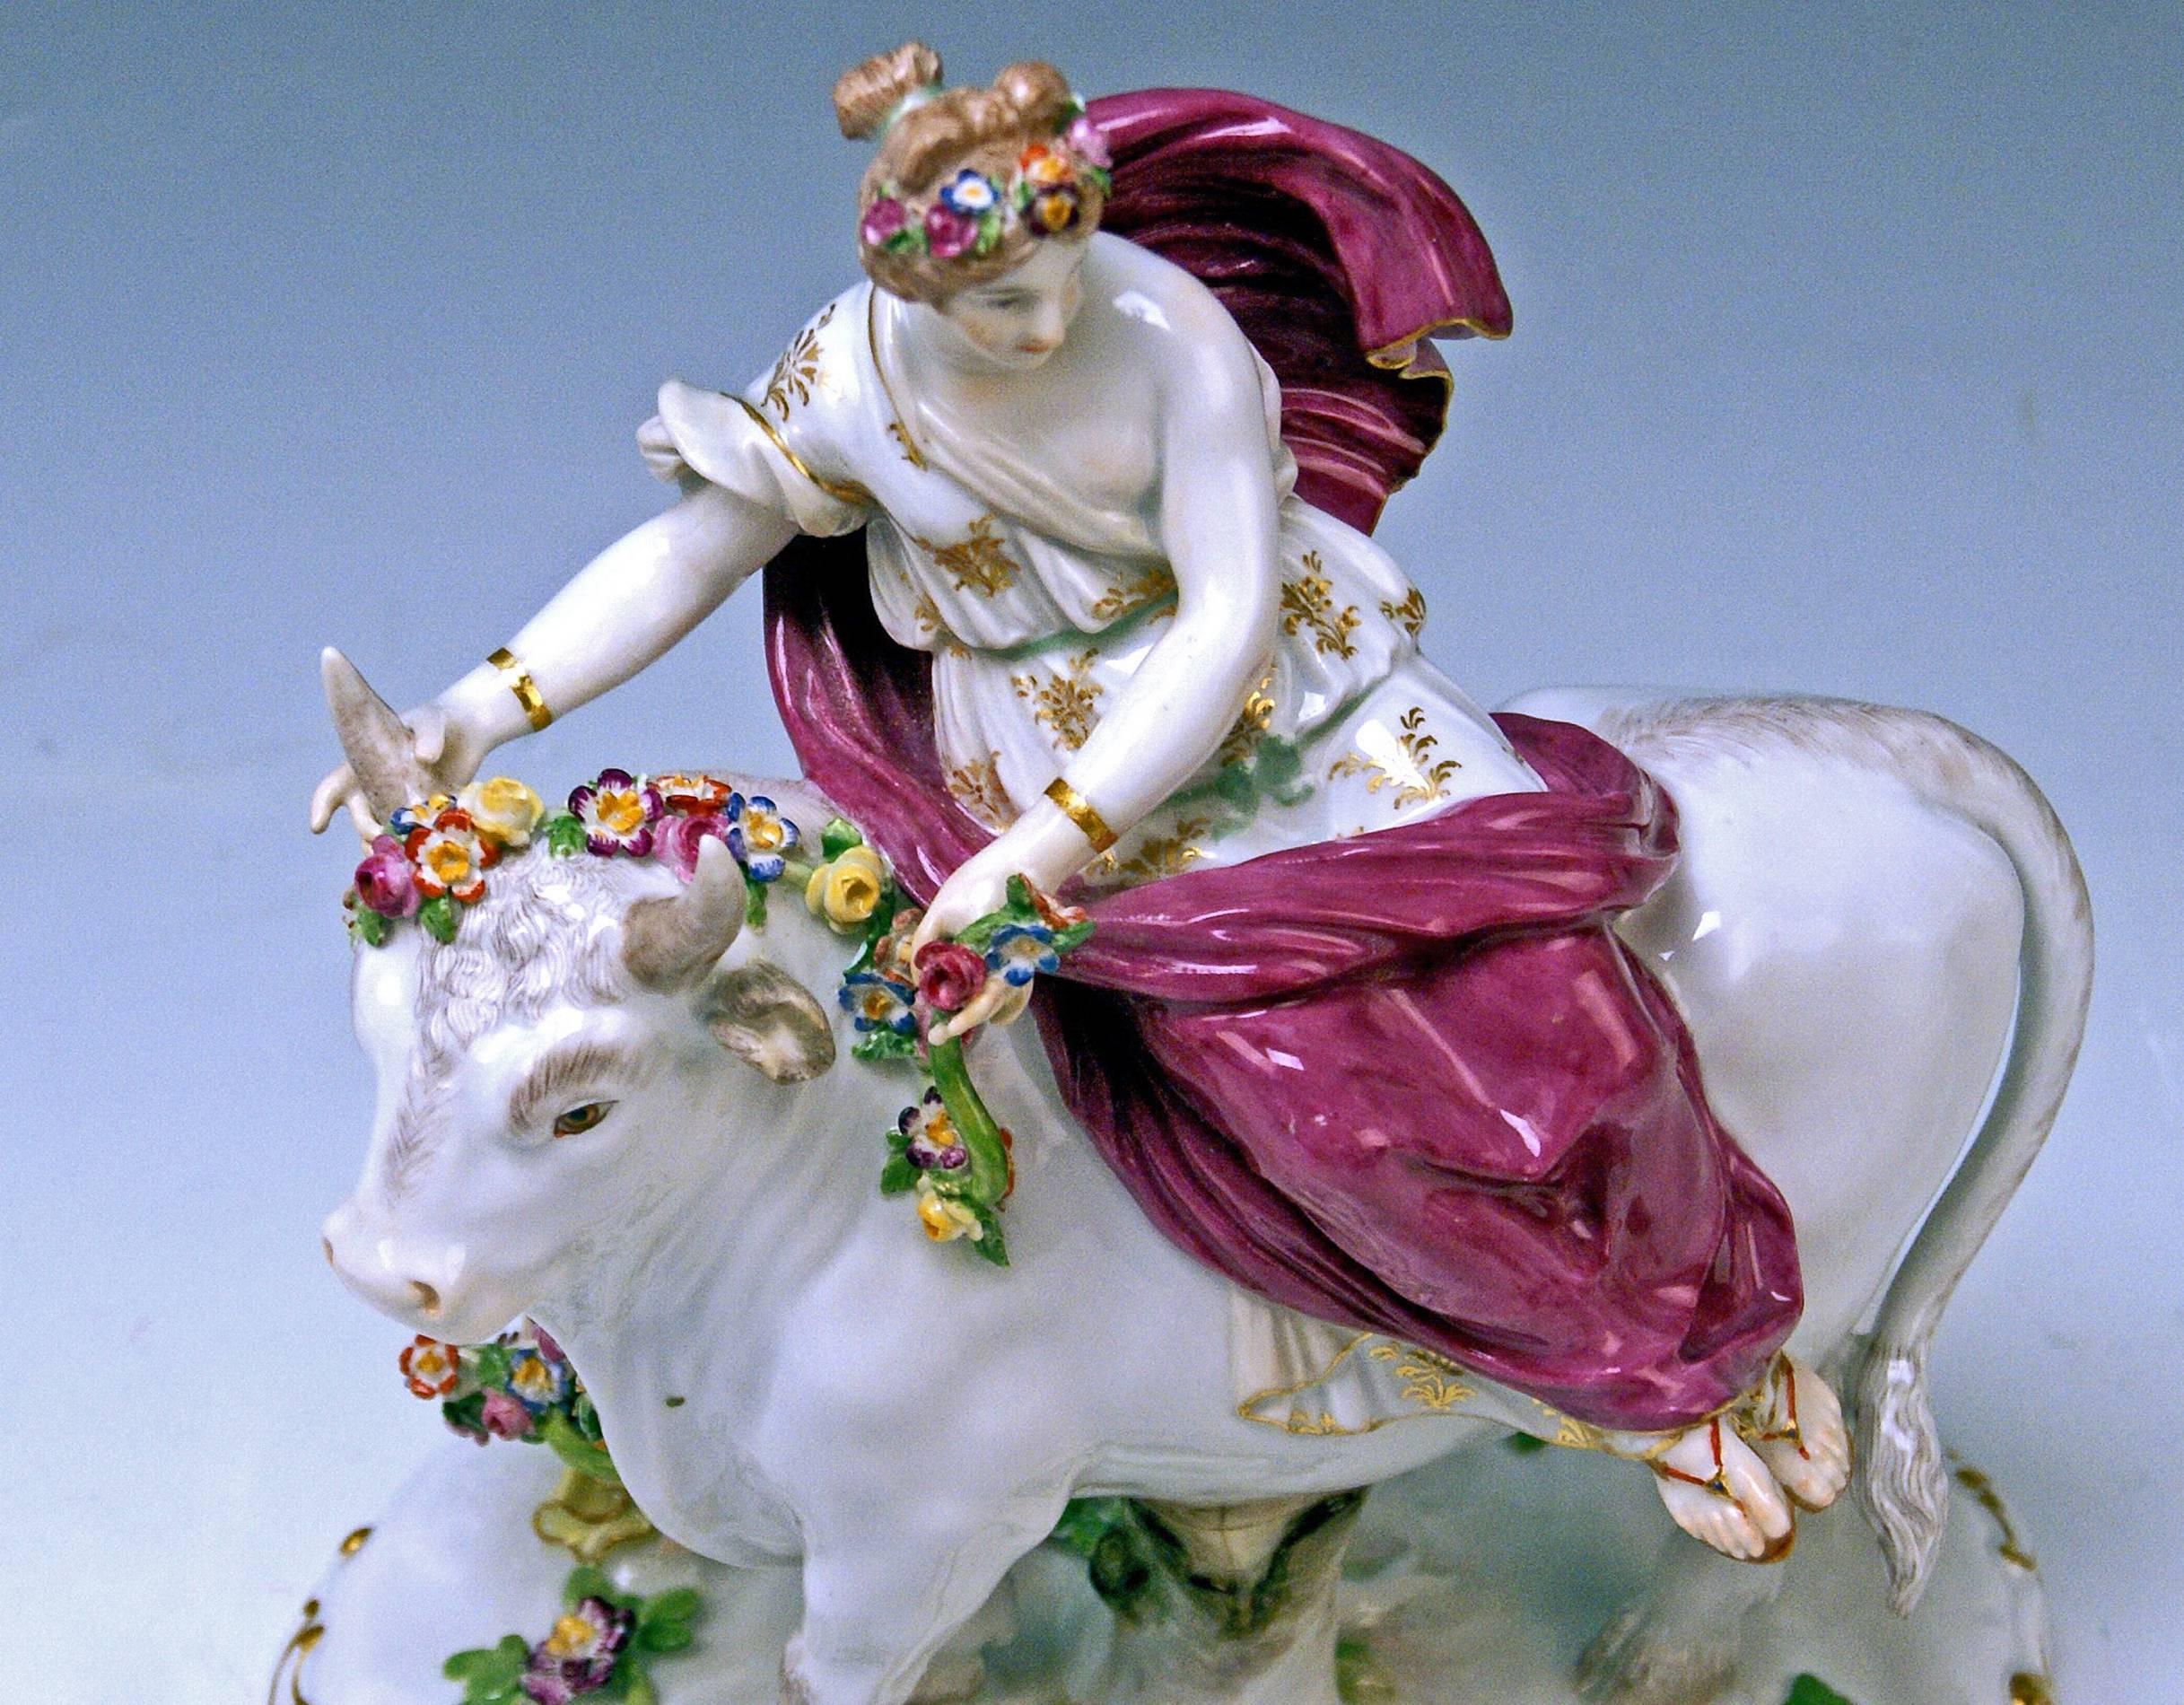 Late 19th Century Meissen Figurines Europe Riding on White Bull by G. Juechtzer made circa 1880